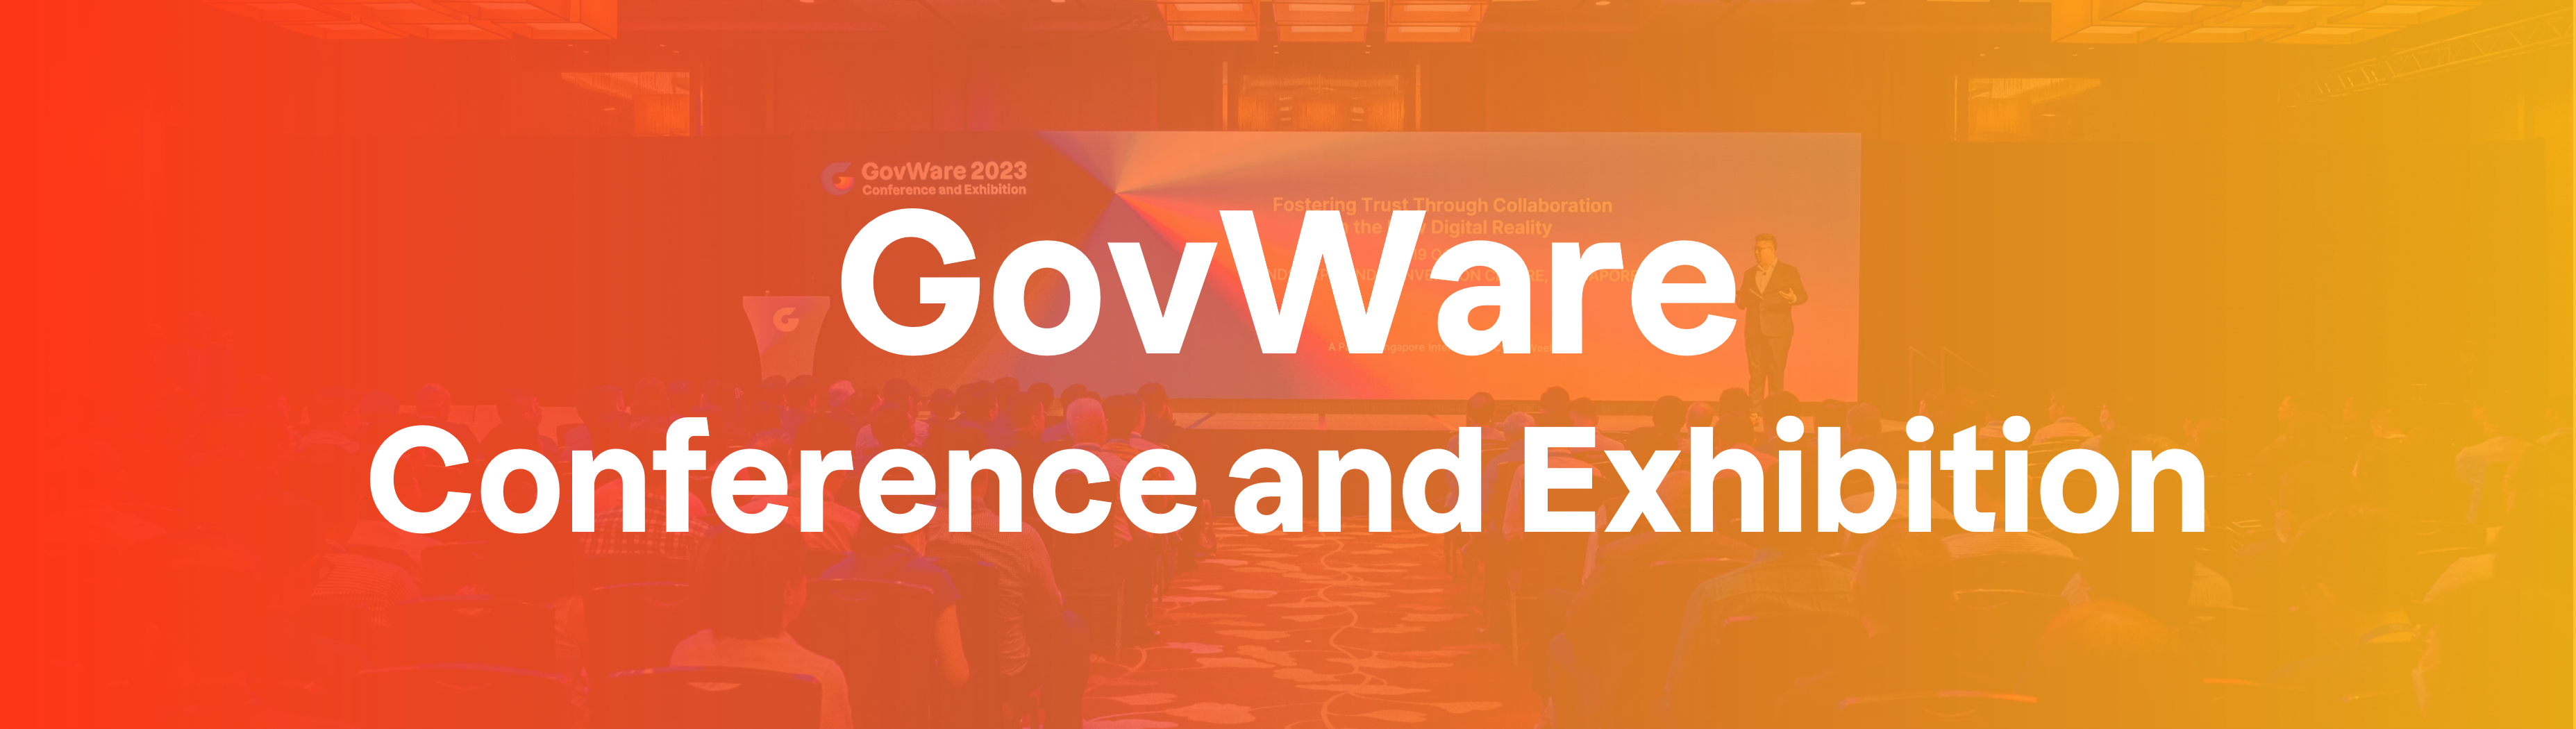 GovWare Conference and Exhibition